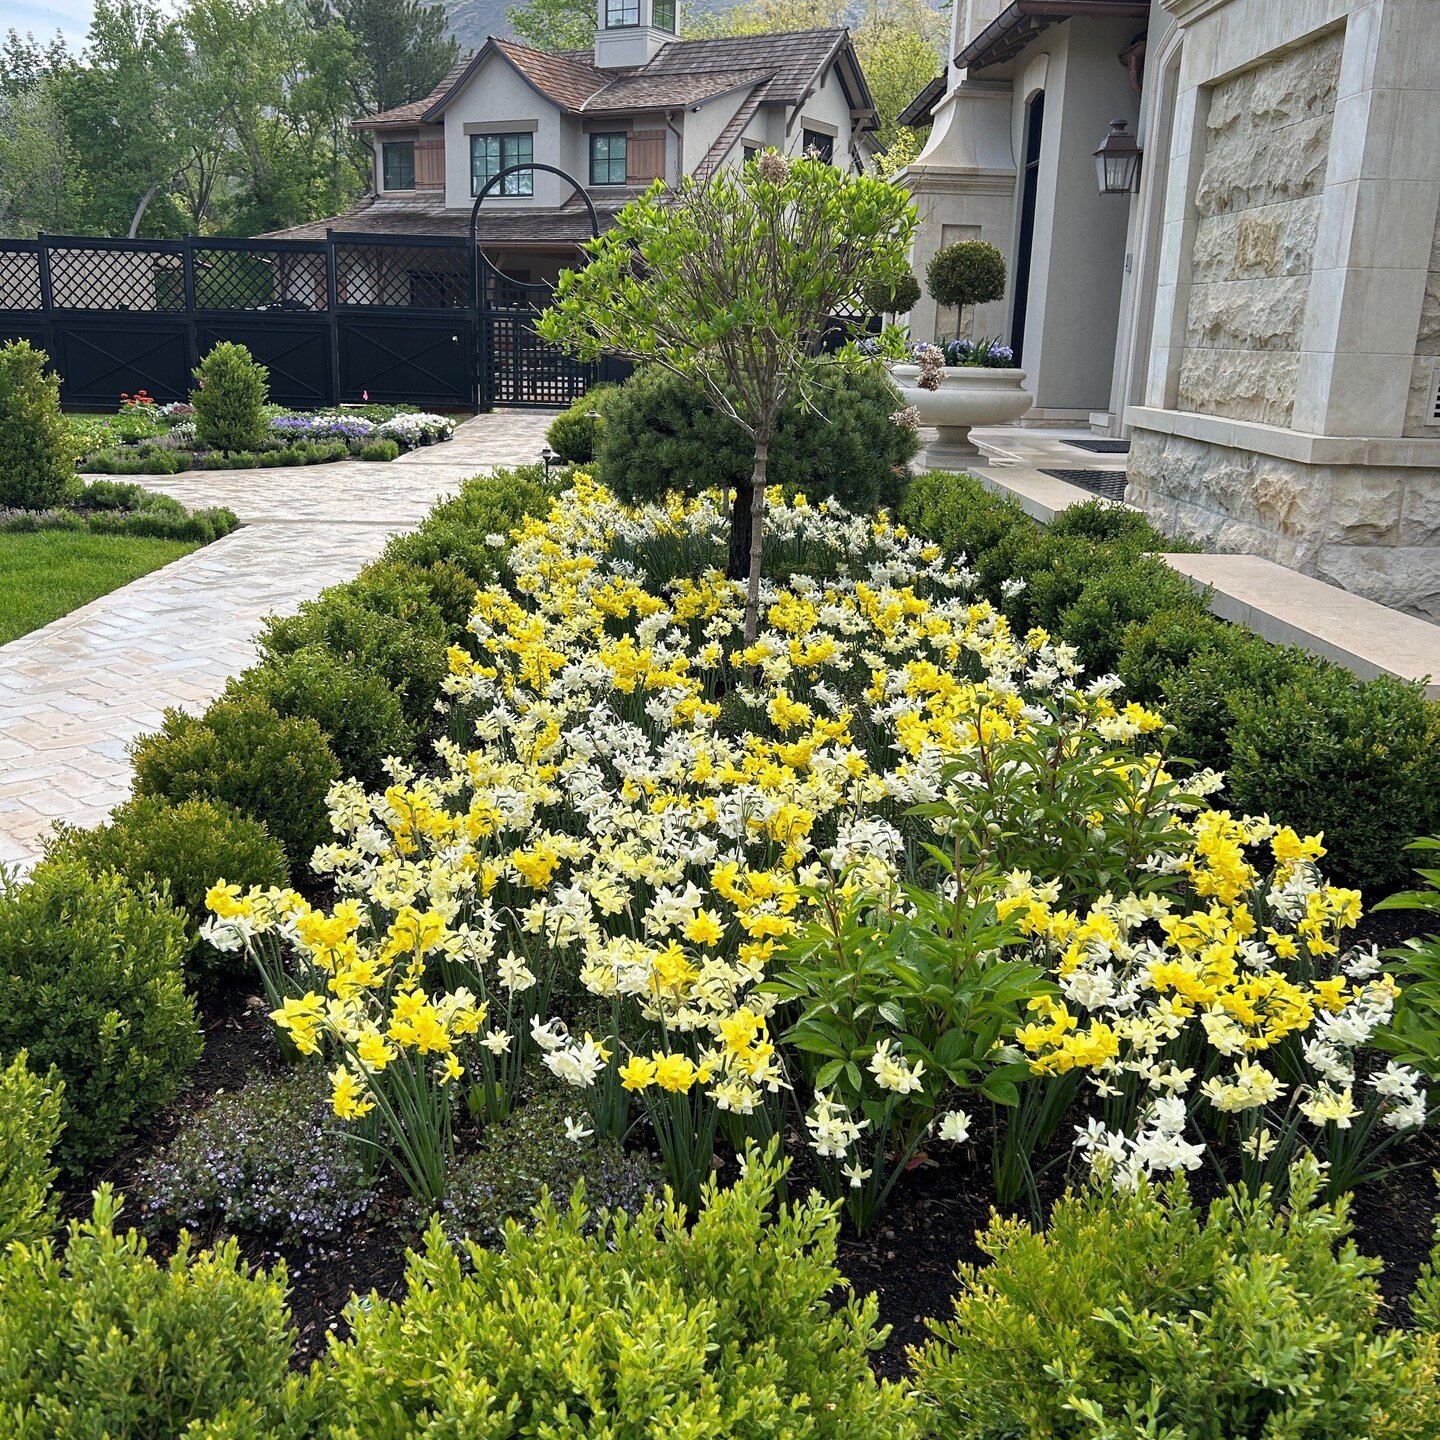 Spring (and rain) is in the air! We're looking forward to seeing all the blooms from the #daffodil and #tulip bulbs we planted last fall.
#landscapedesign #landscape #spring #boxwoods #utah #utahlandscaper #flowers #saltlakecity